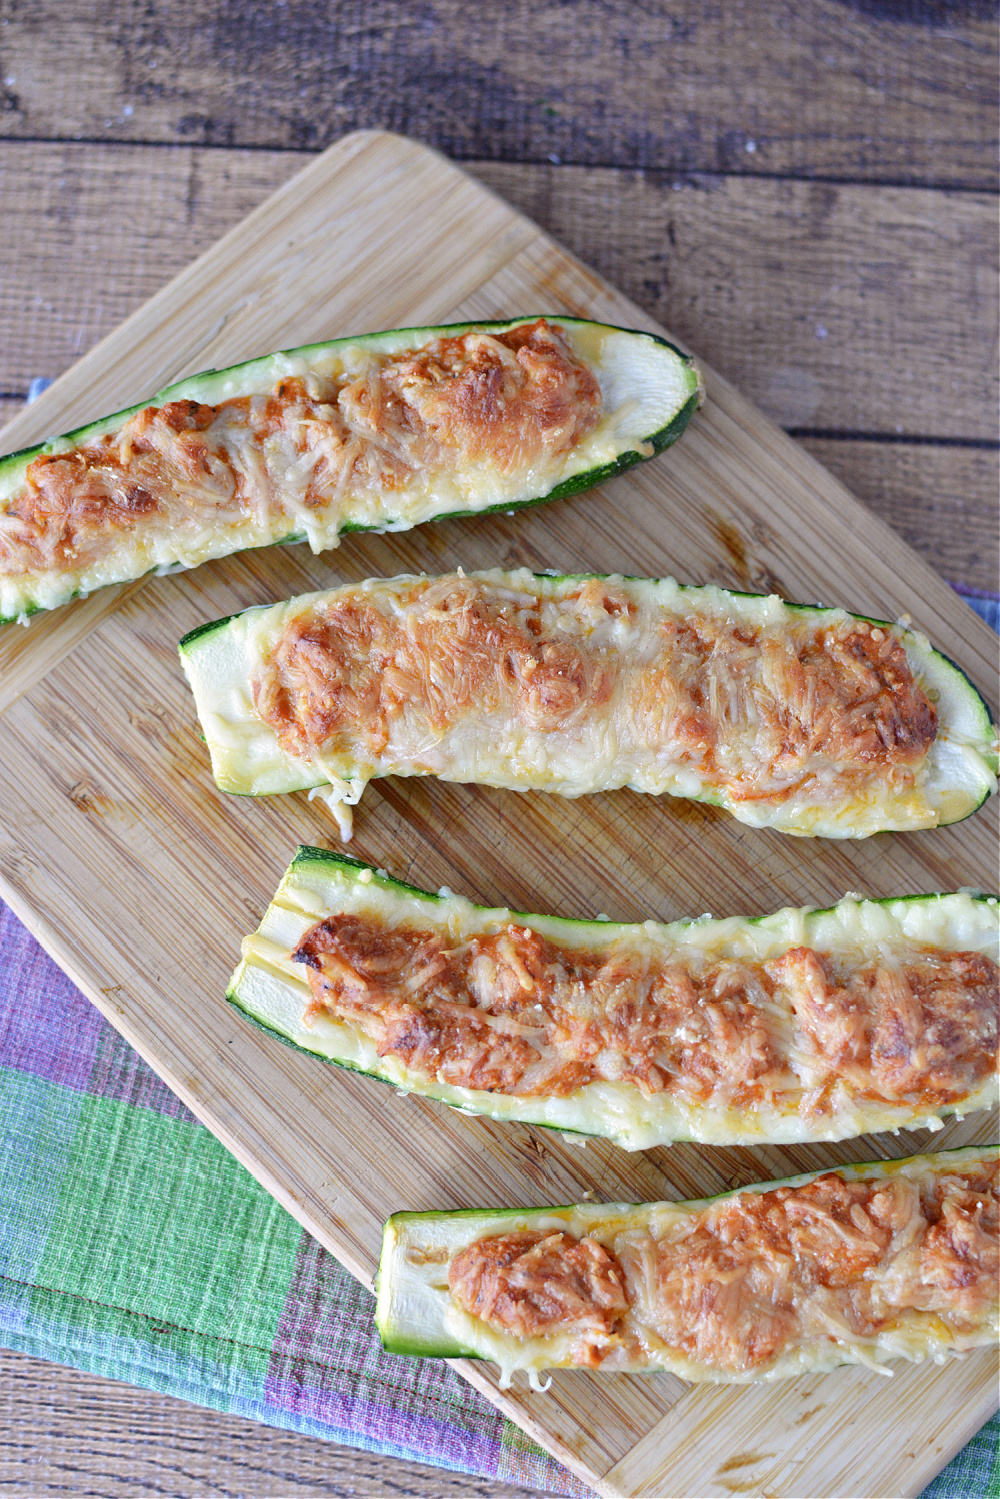 halved zucchini filled with ground beef or chicken and topped with melted cheese on a wooden cutting board